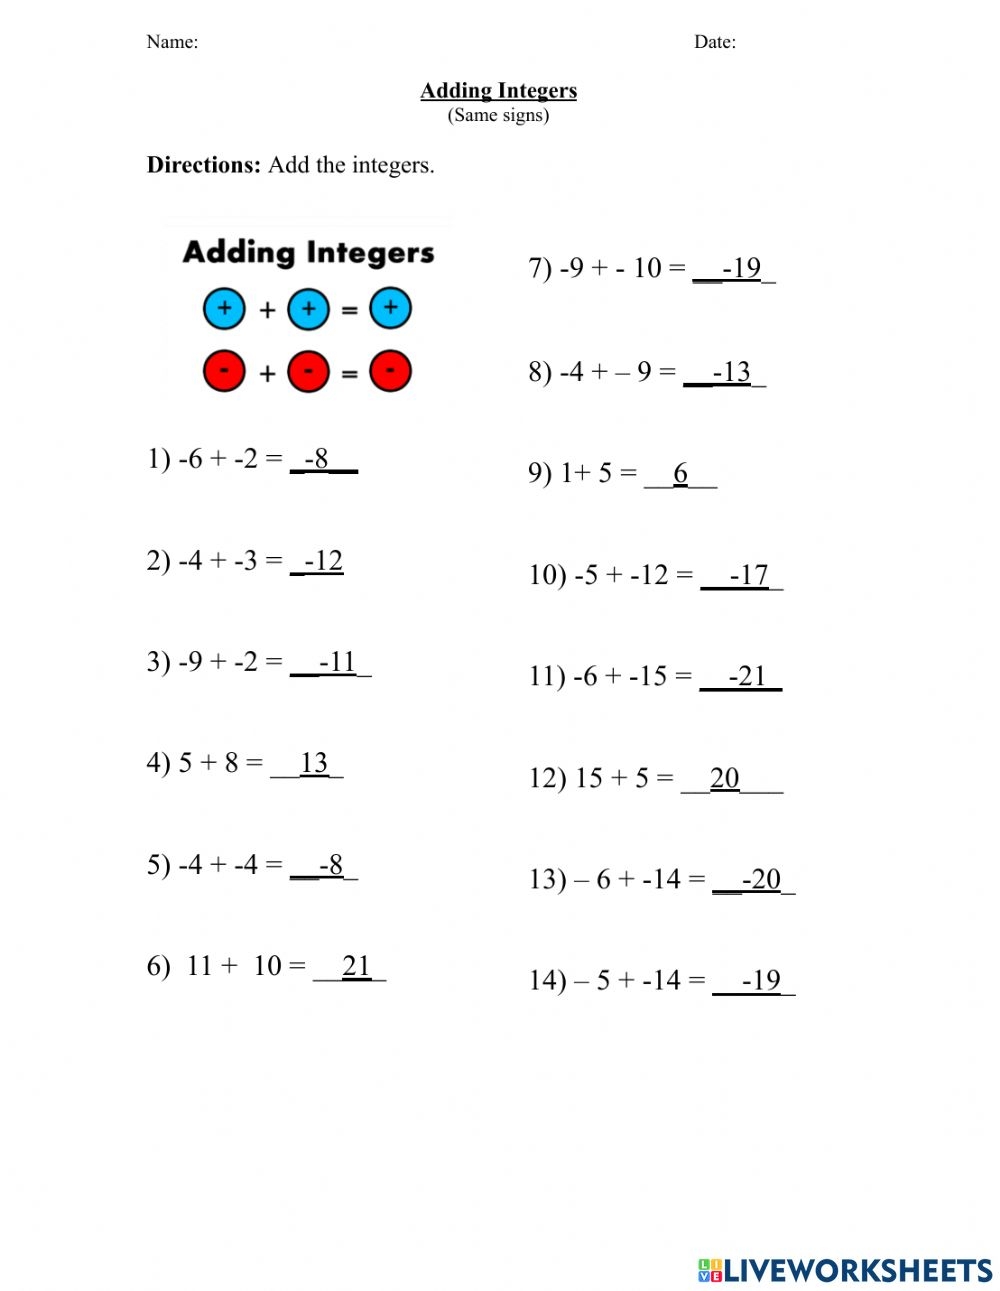 adding-integers-with-same-signs-worksheet-math-worksheet-answers